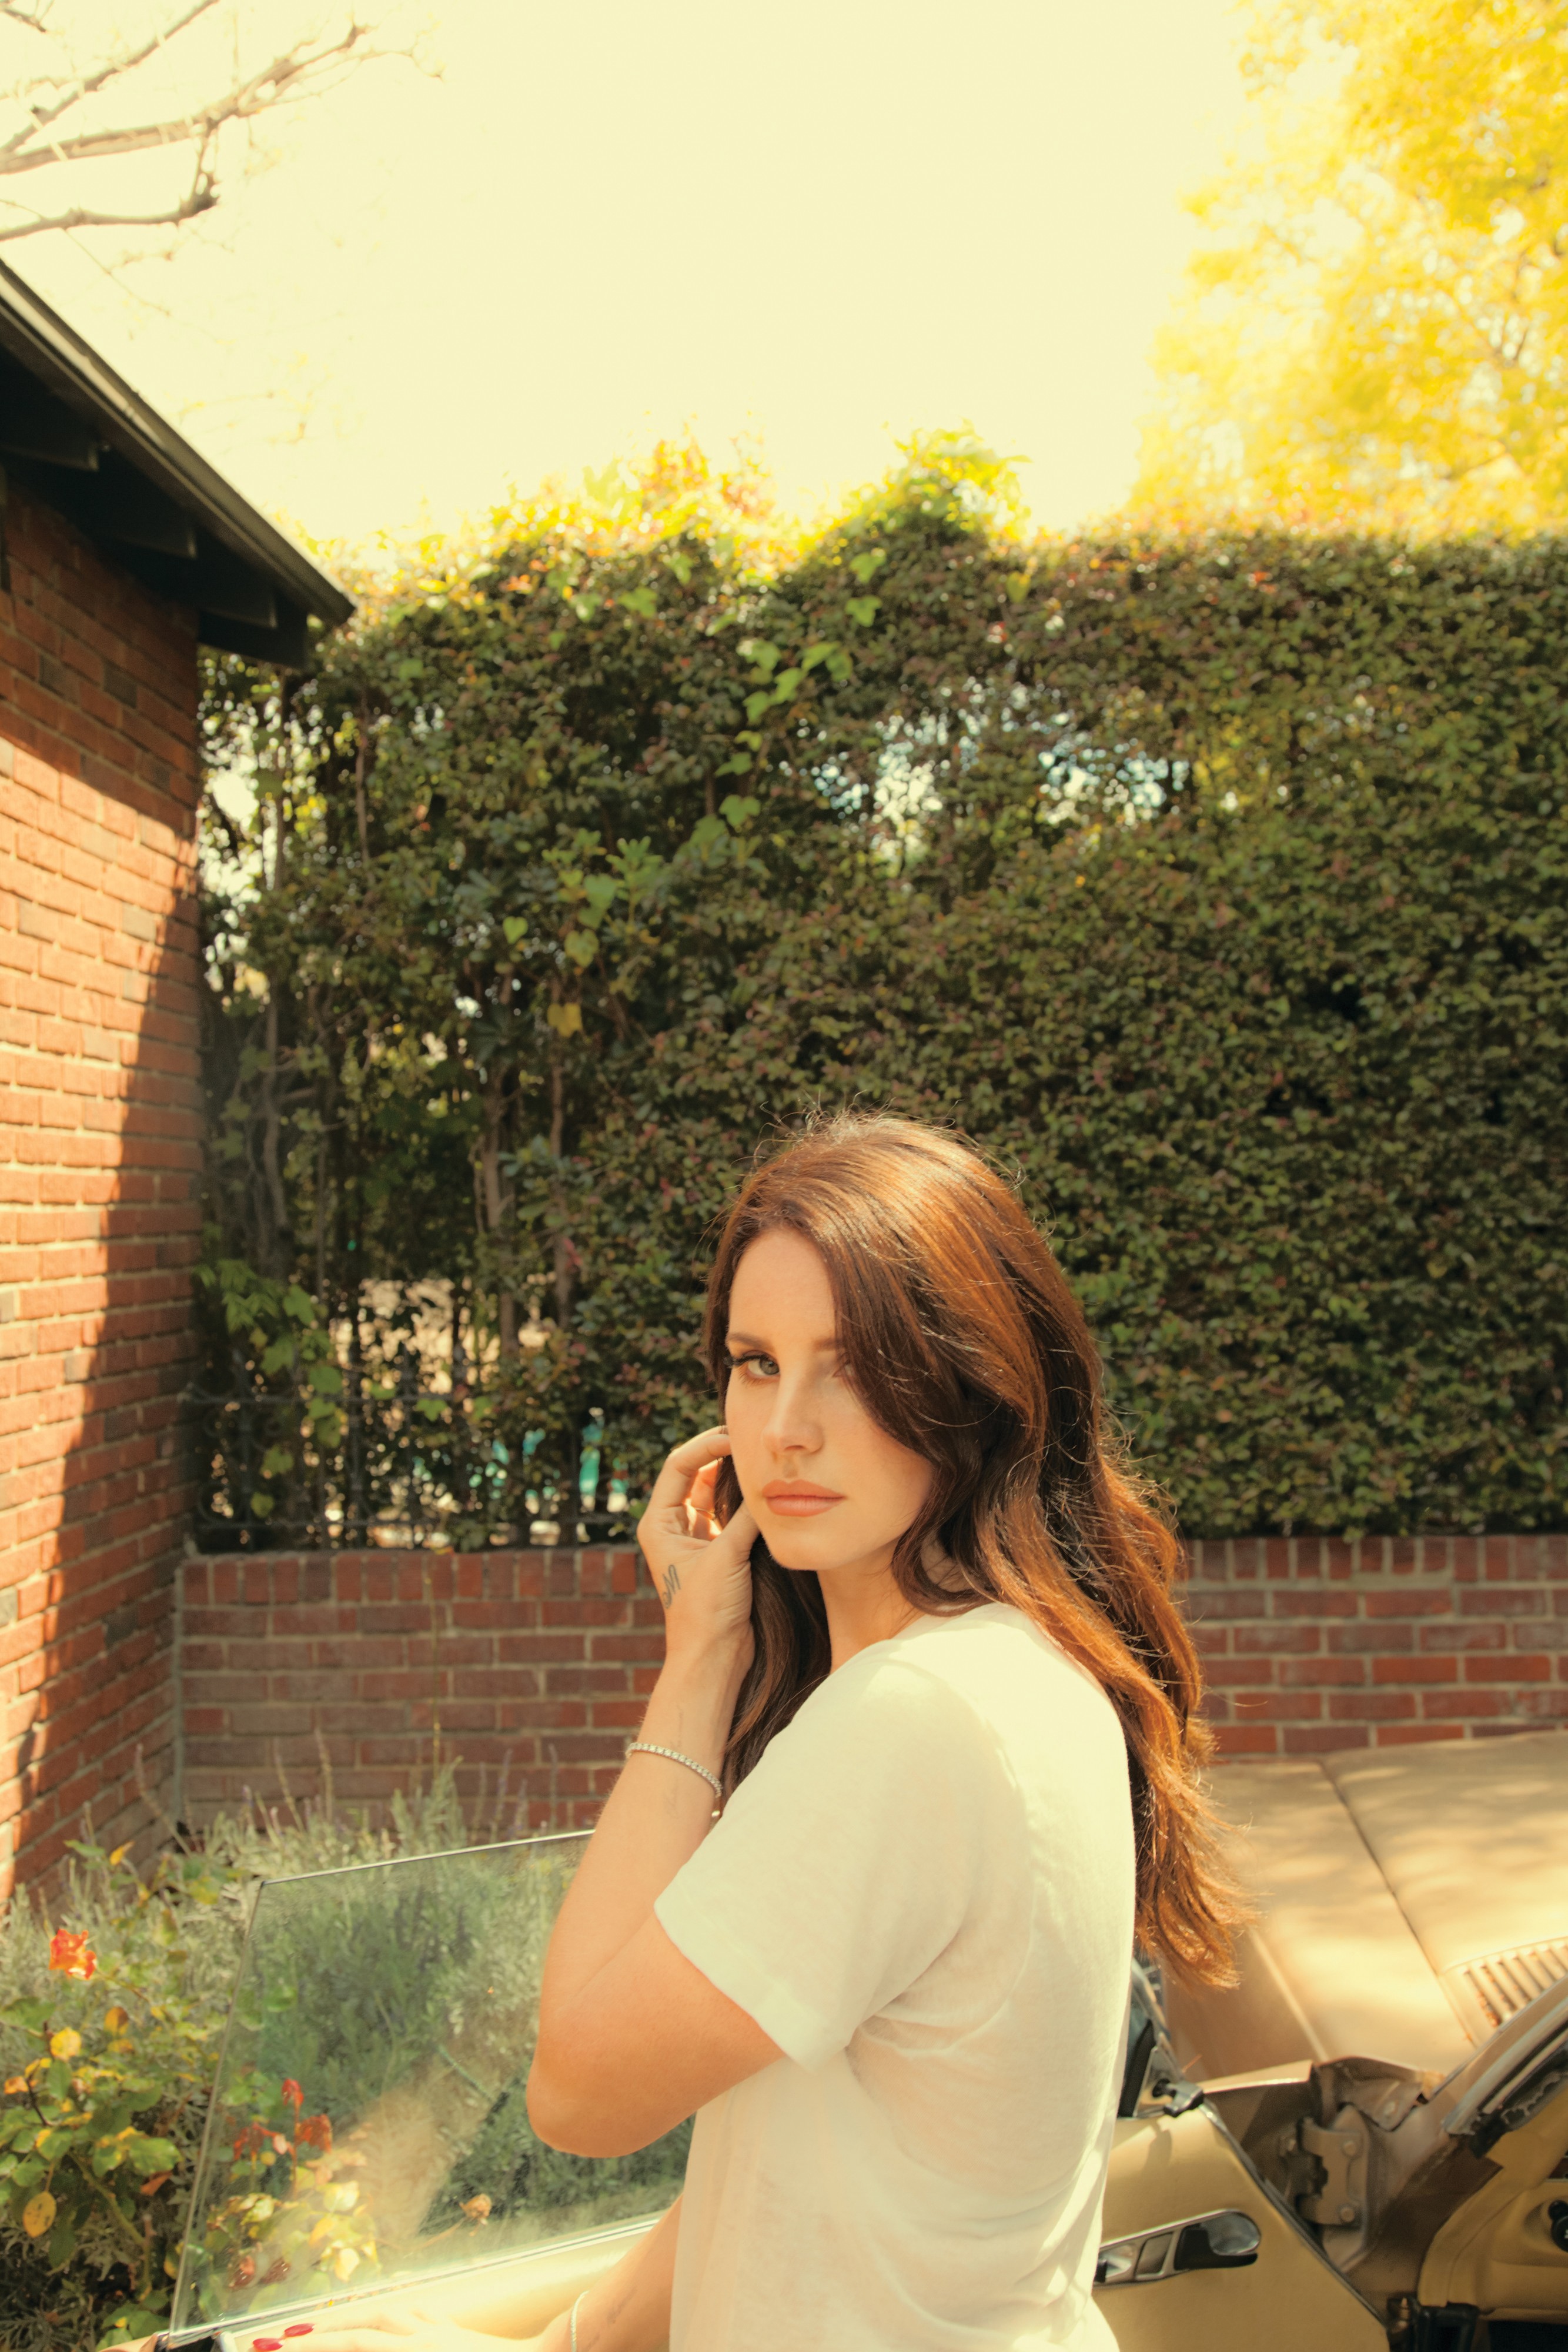 2015 Lana Del Rey North American Tour Dates with very special guest Courtney Love